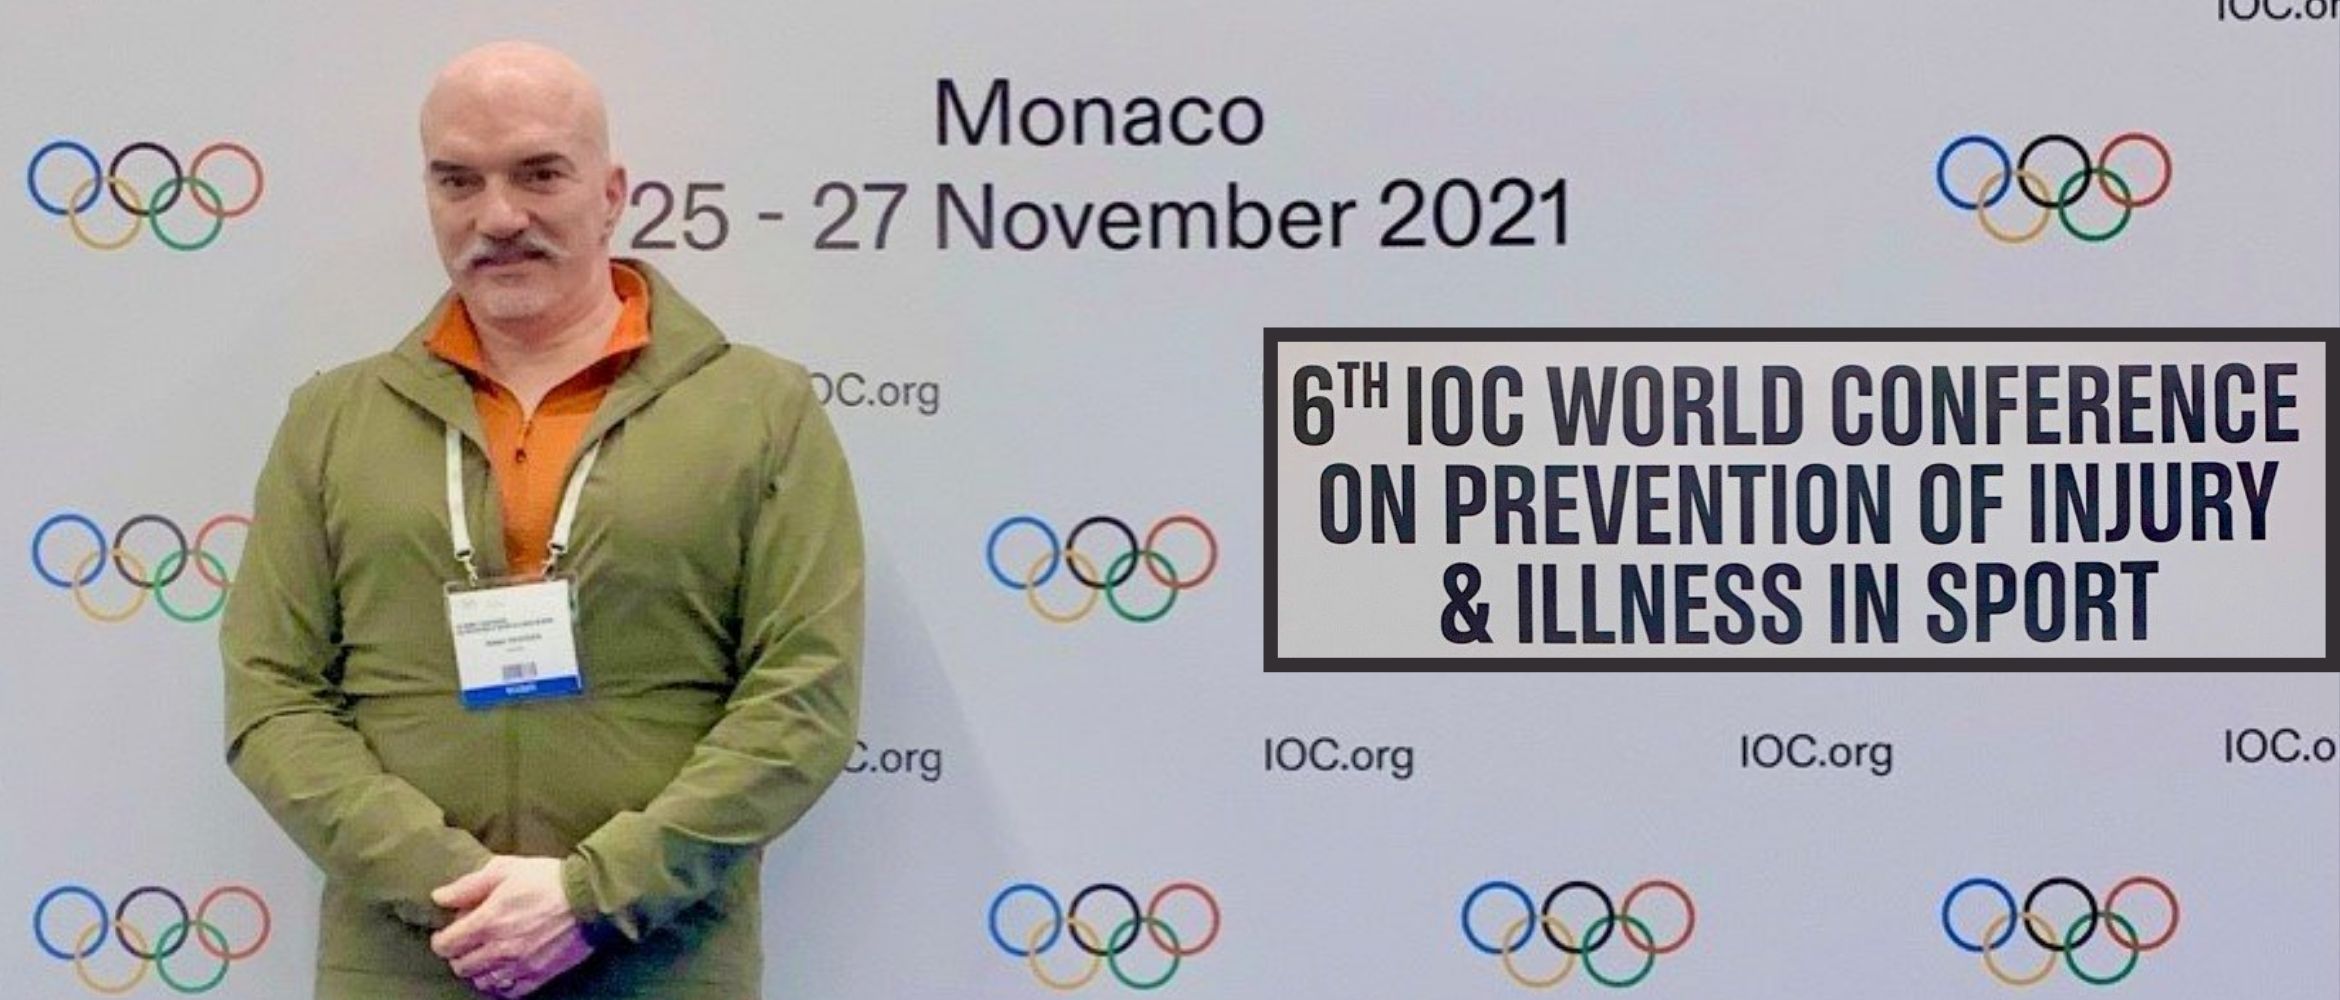 Dr. Babak Shadgan presents studies at the 2021 IOC World Conference on Prevention of Injury and Illness in Sport showing that modifying sports regulations prevents injuries